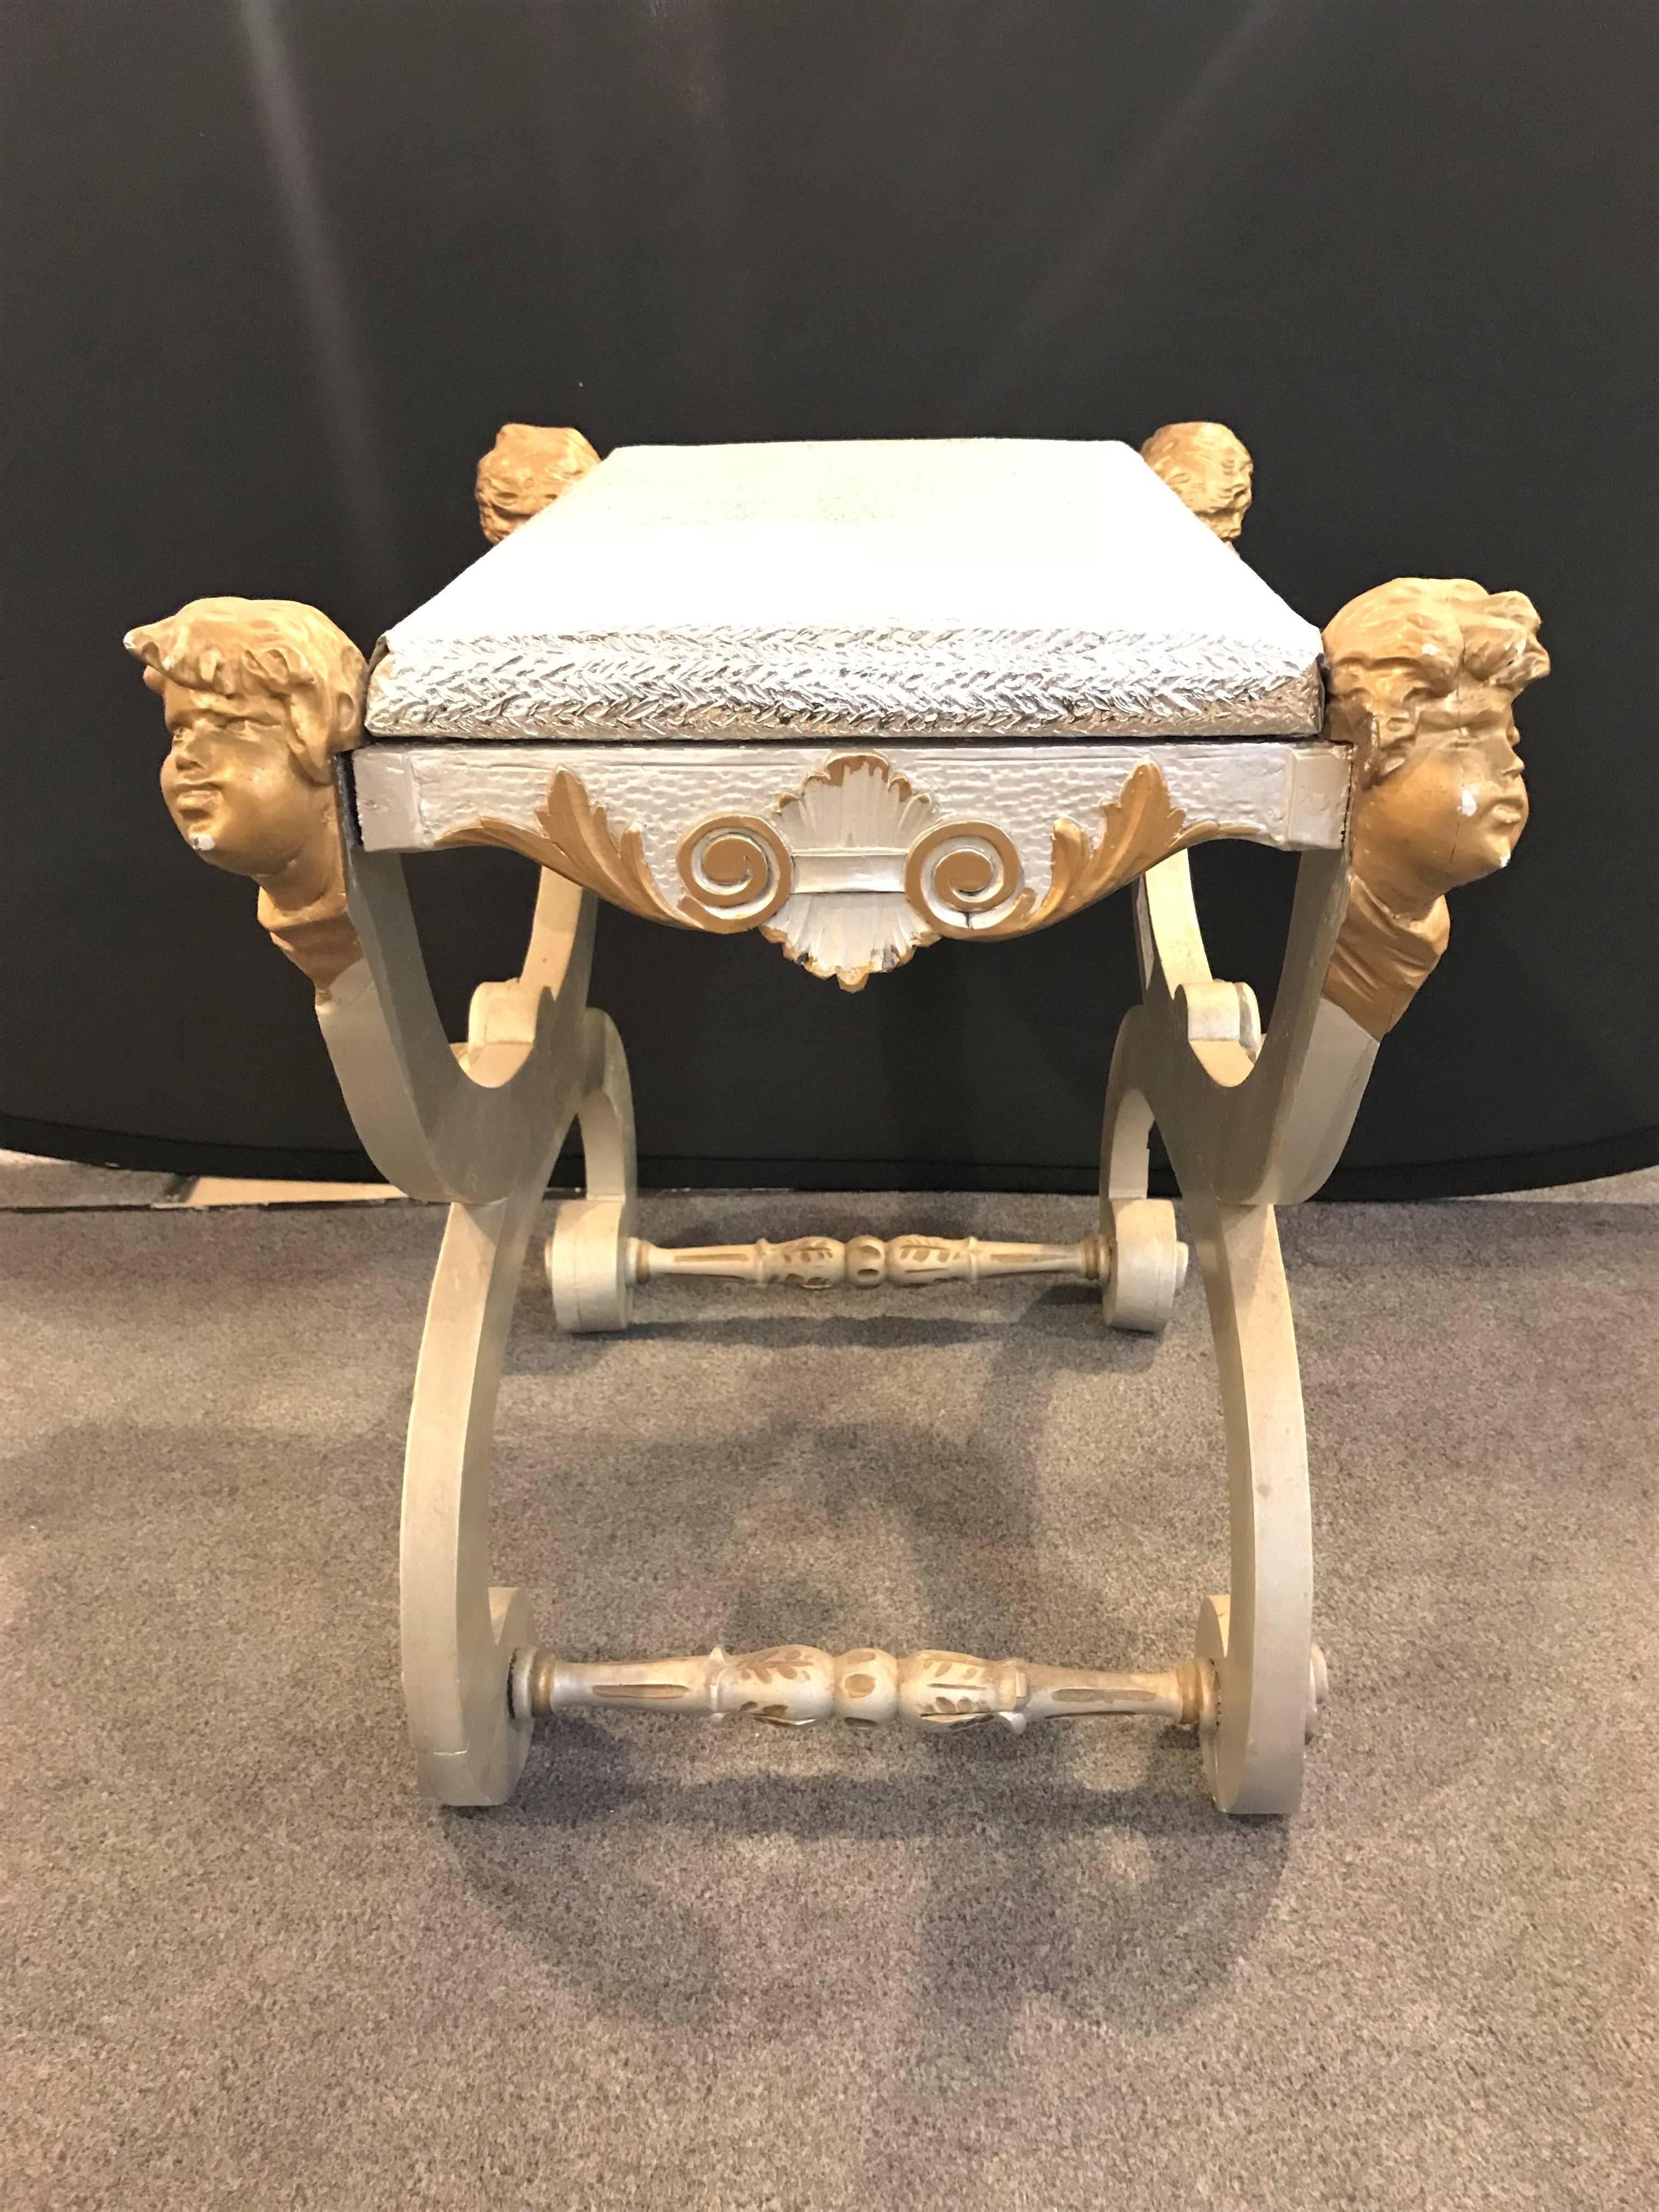 A fine antique Italian Cerule stool or bench with detailed cherub carvings in gilt.